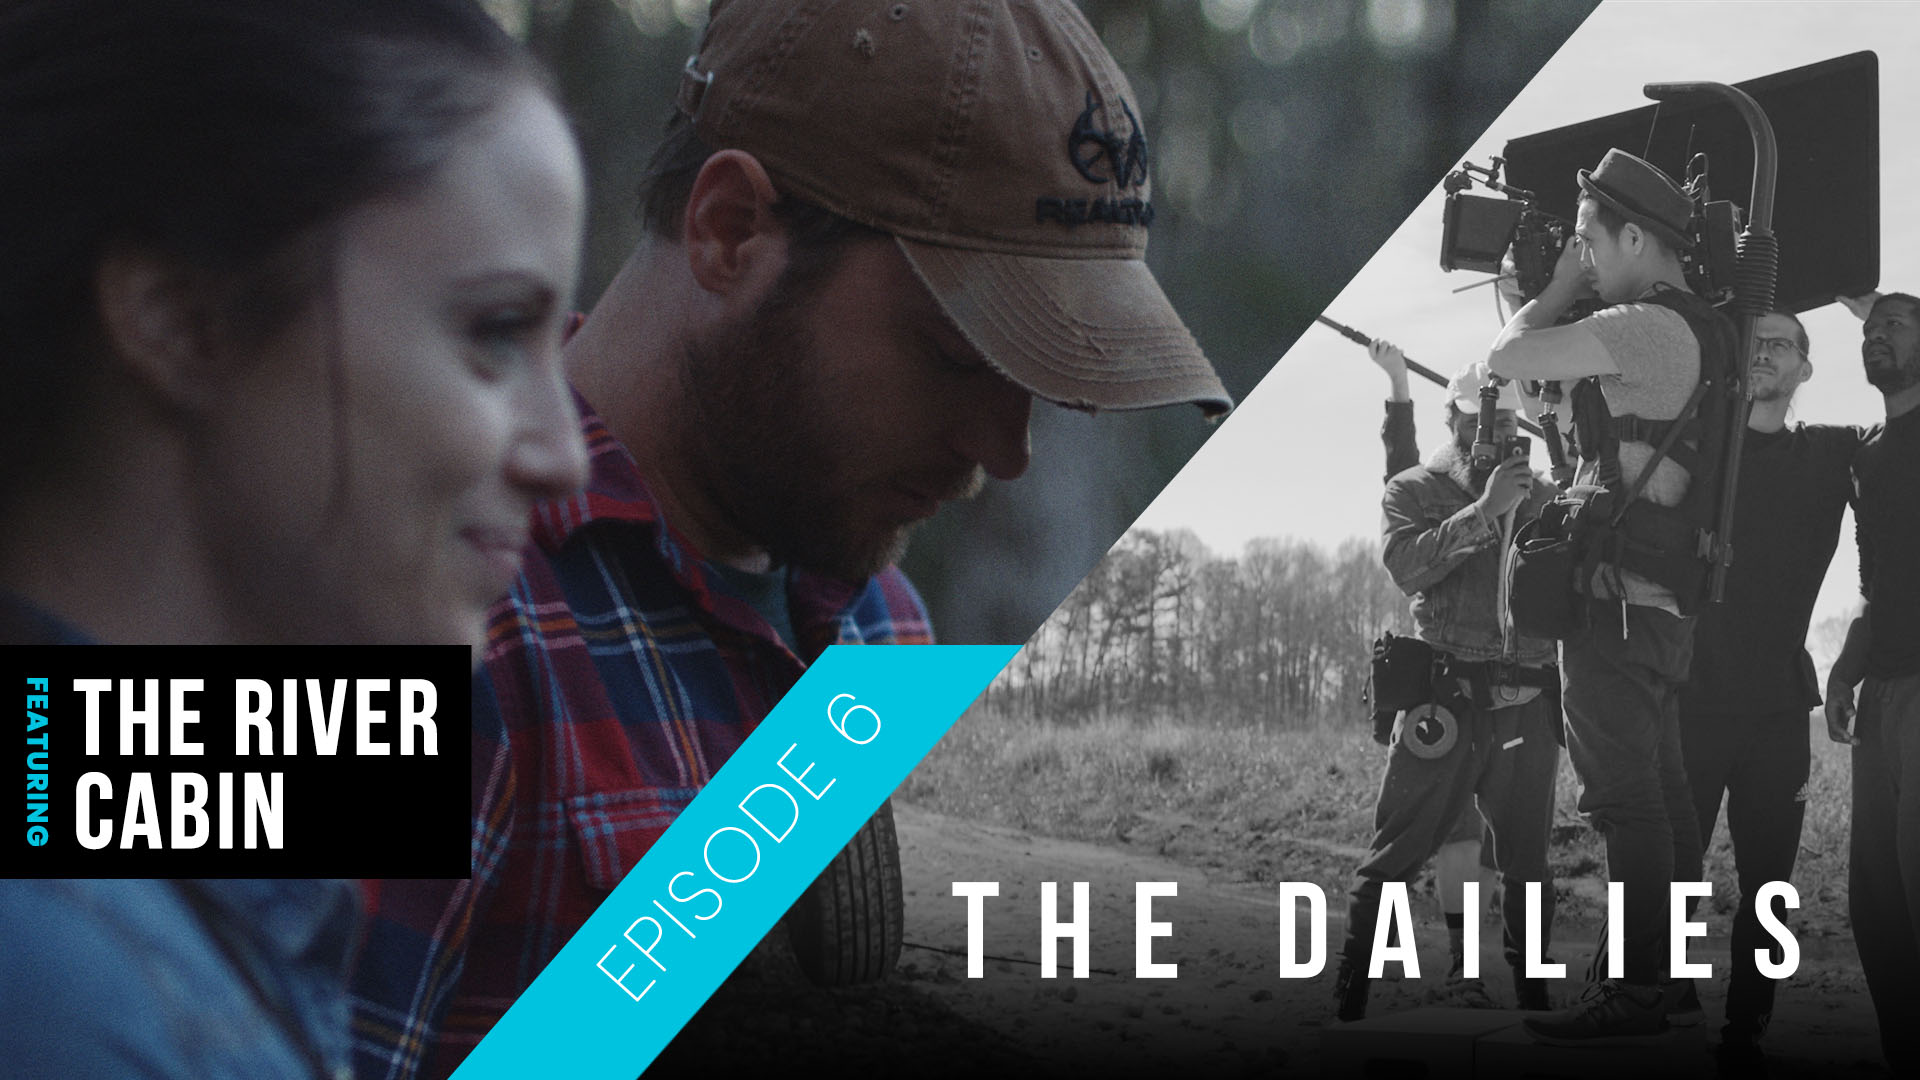 Dailies Episode 6 The River Cabin Film Side profile of man wearing brown cap and red flannel shirt and woman wearing jean shirt as well as black and white of filming crew